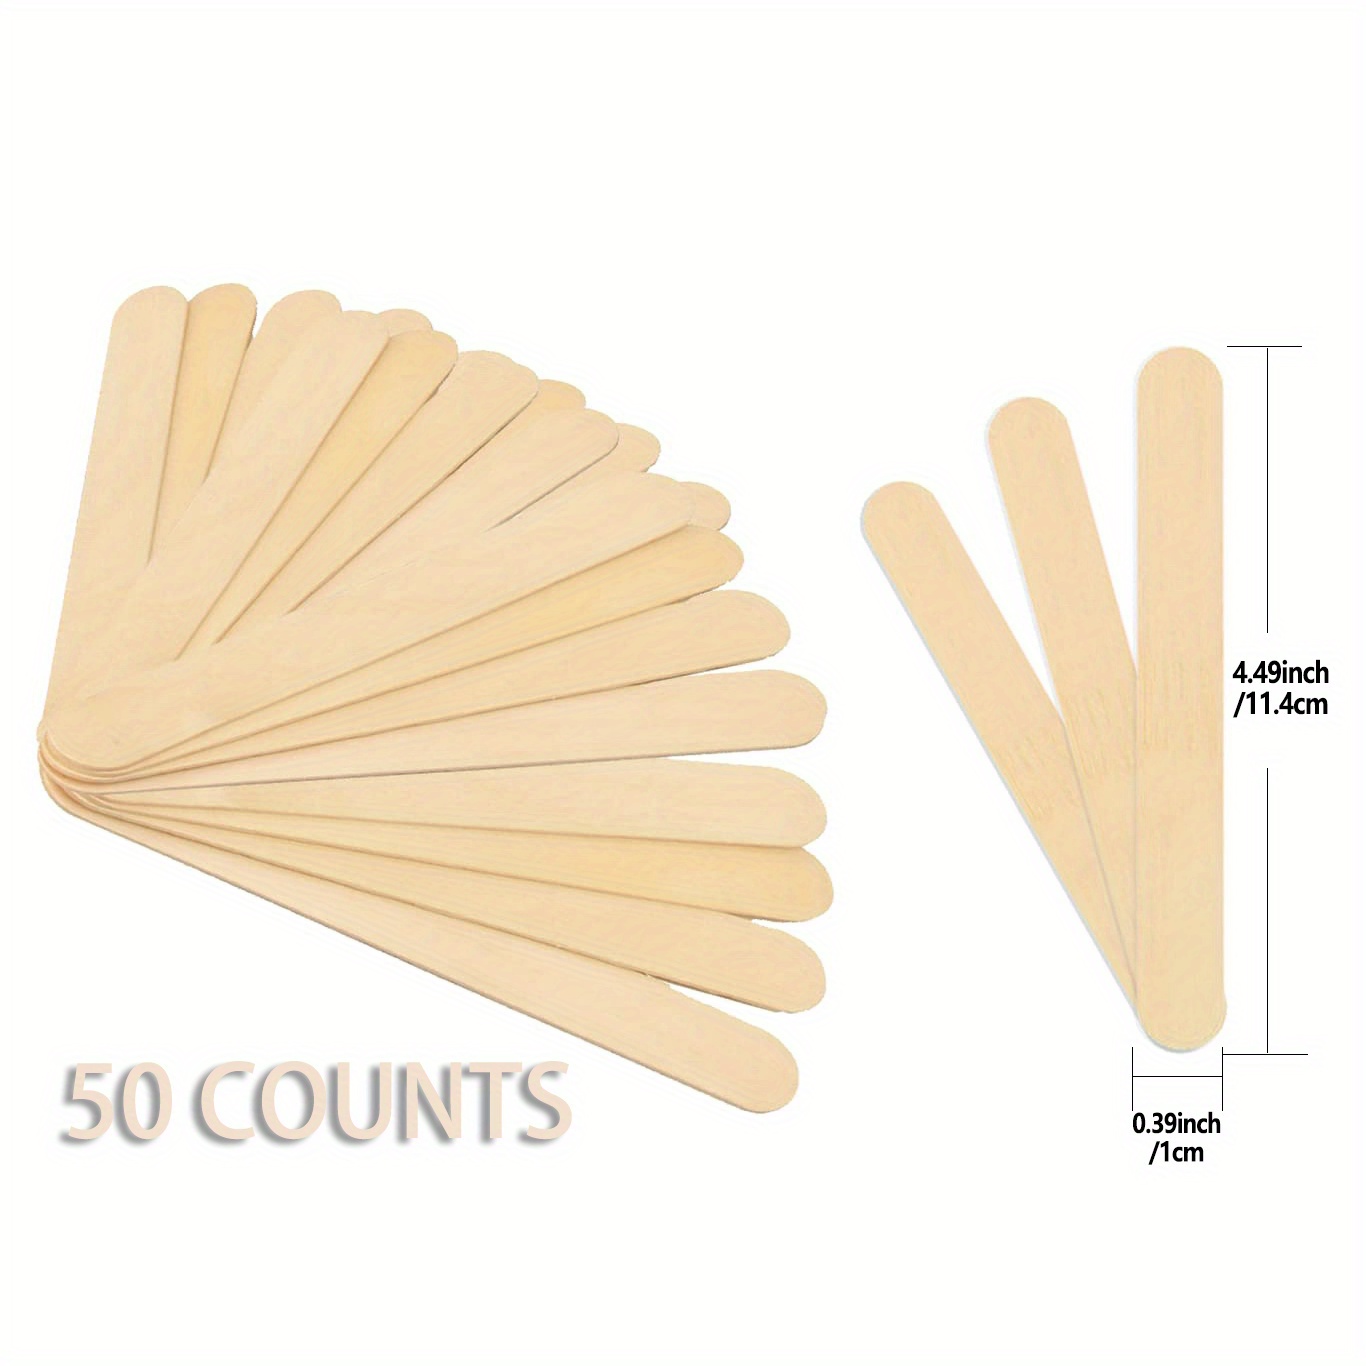 600 Pieces Wax Strips and Wax Applicator Sticks Kit Includes 400